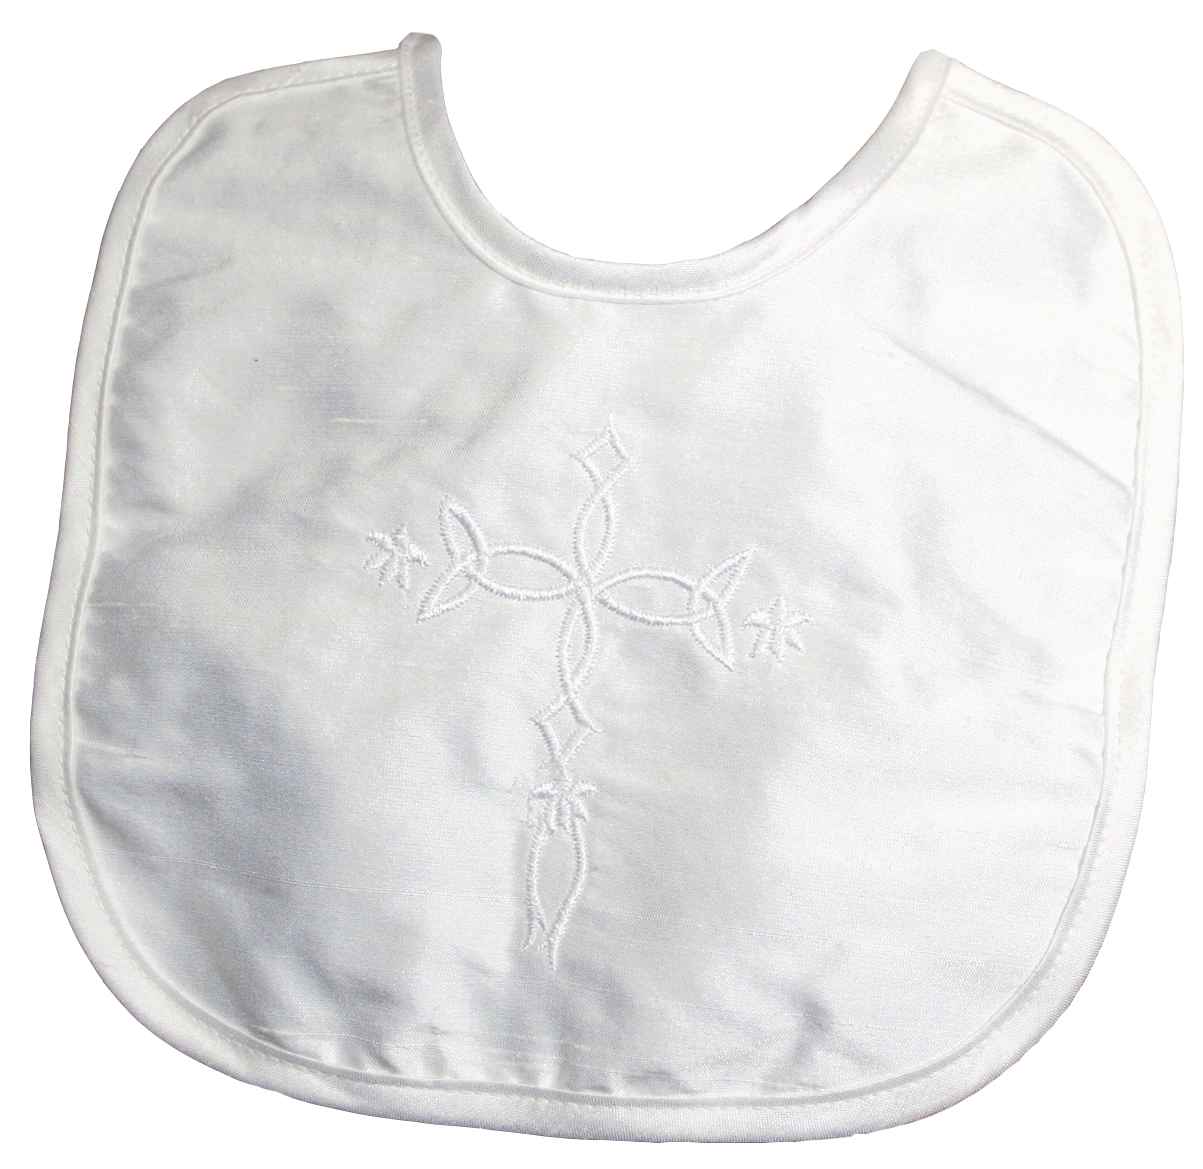 Unisex White Silk Dupioni Christening Bib with Embroidered Cross - Little Things Mean a Lot